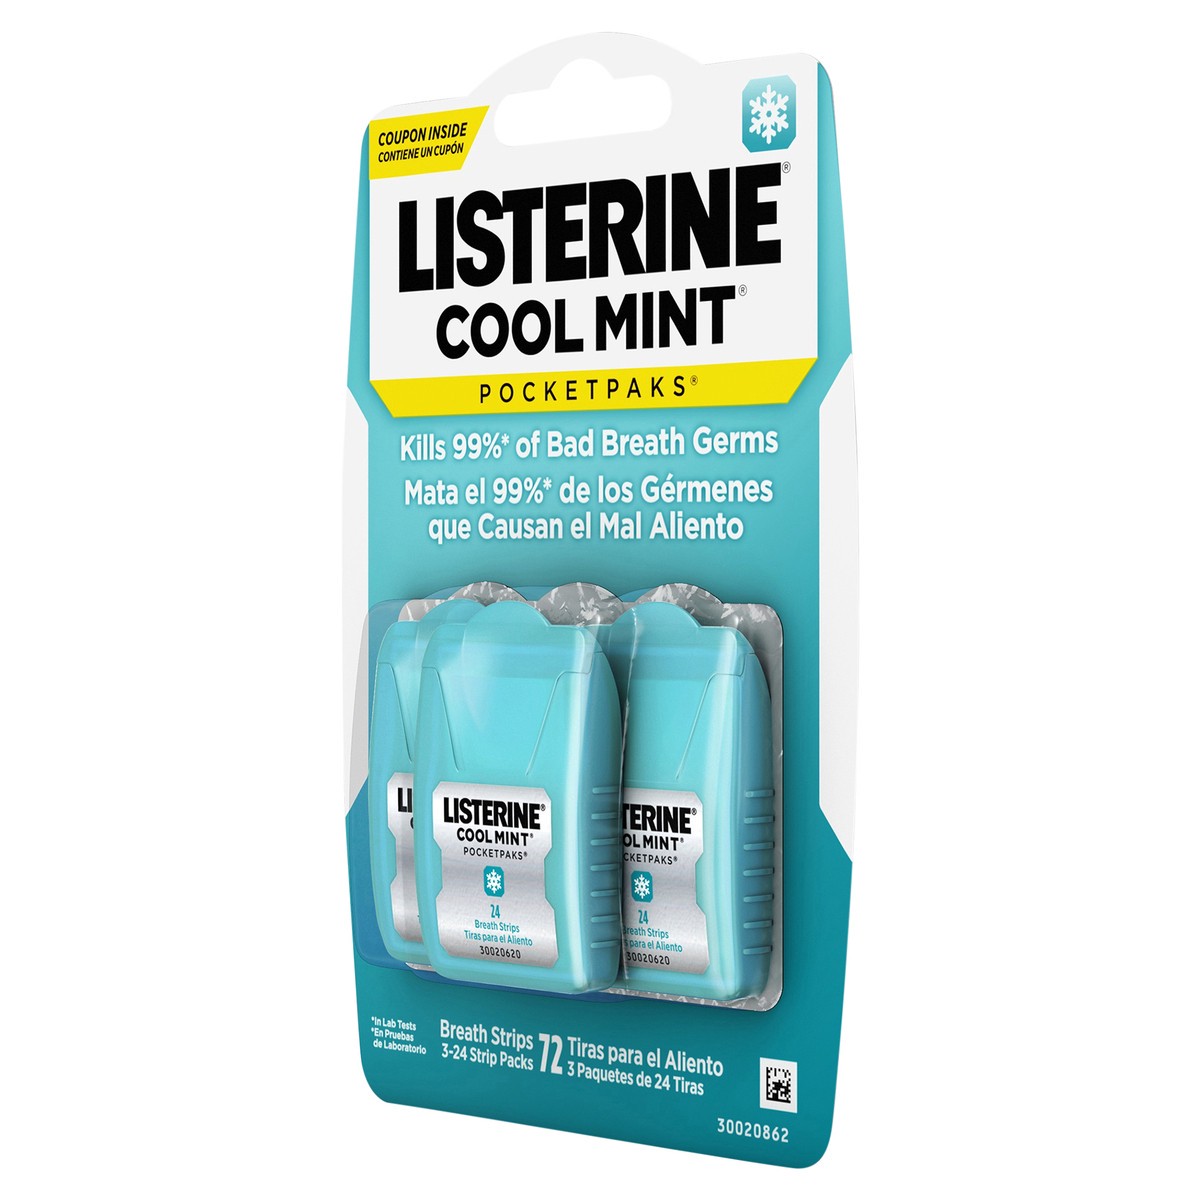 slide 2 of 6, Listerine Cool Mint PocketPaks Portable Breath Strips for Bad Breath, Fresh Breath Strips Dissolve Instantly to Kill 99% of Bad Breath Germs* On-the-Go, Cool Mint, 24-Strip Pack, 3 Pack, 72 ct